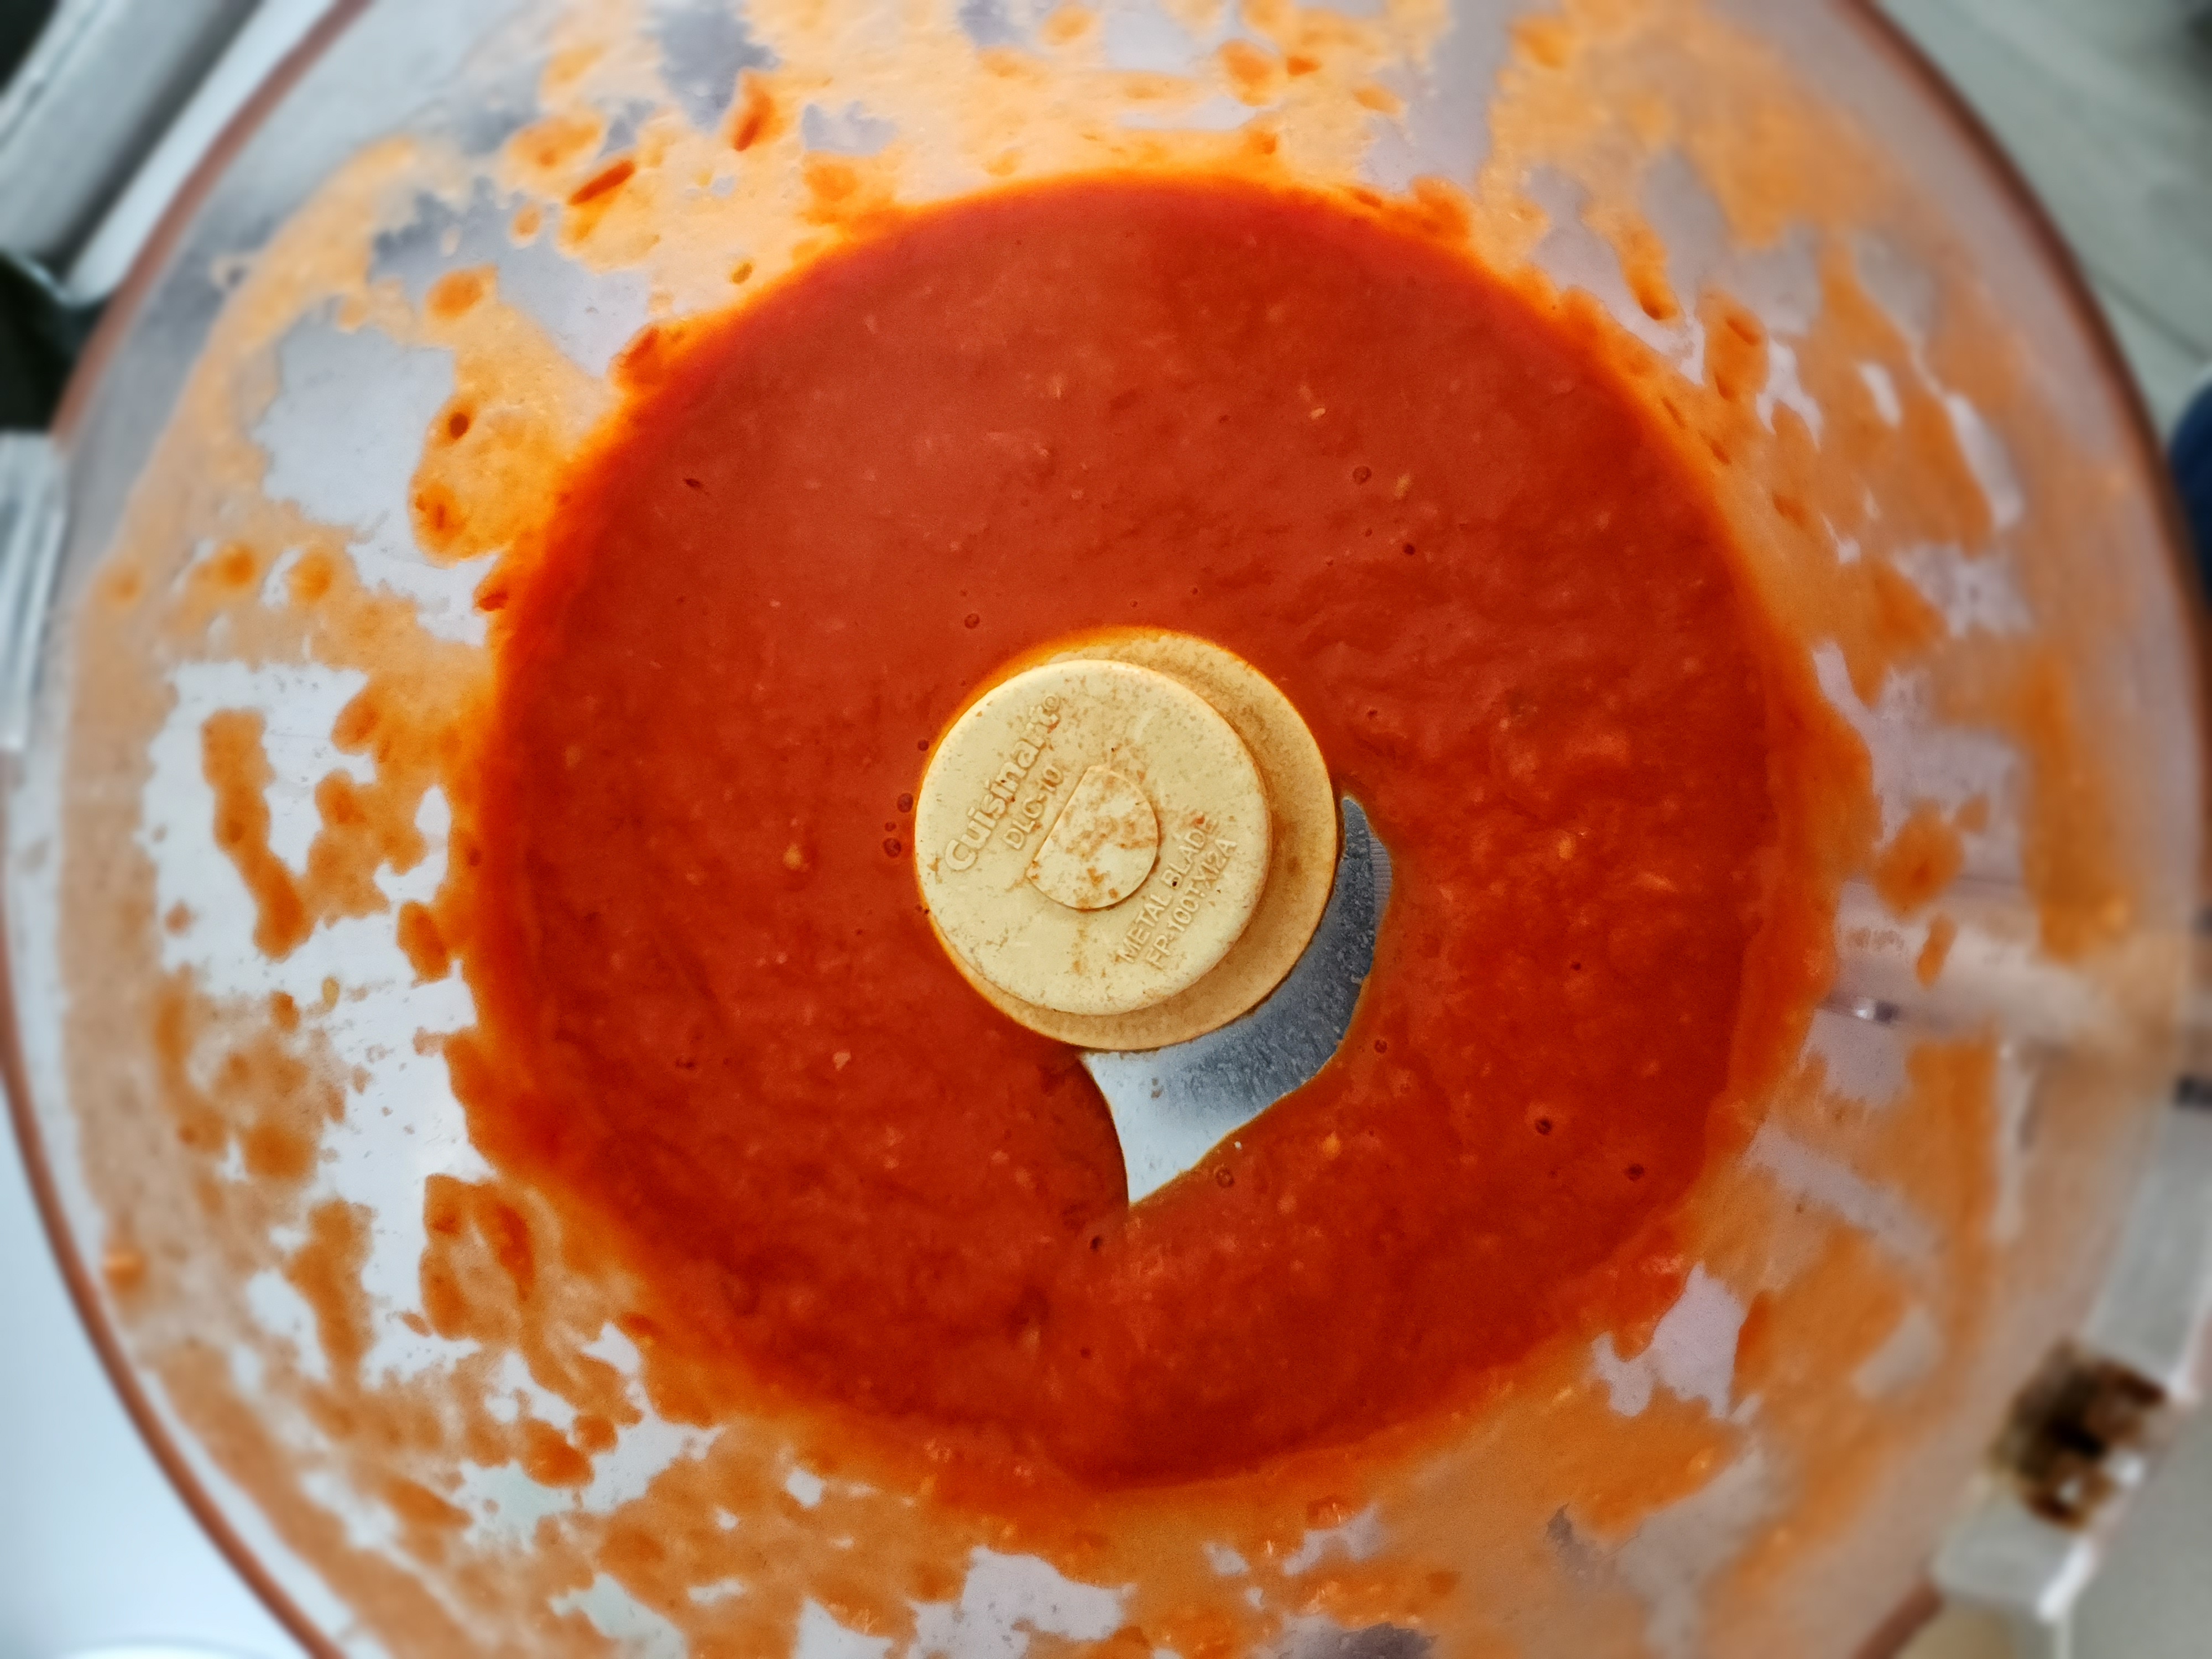 Tomatoes pureed if you don't want them whole